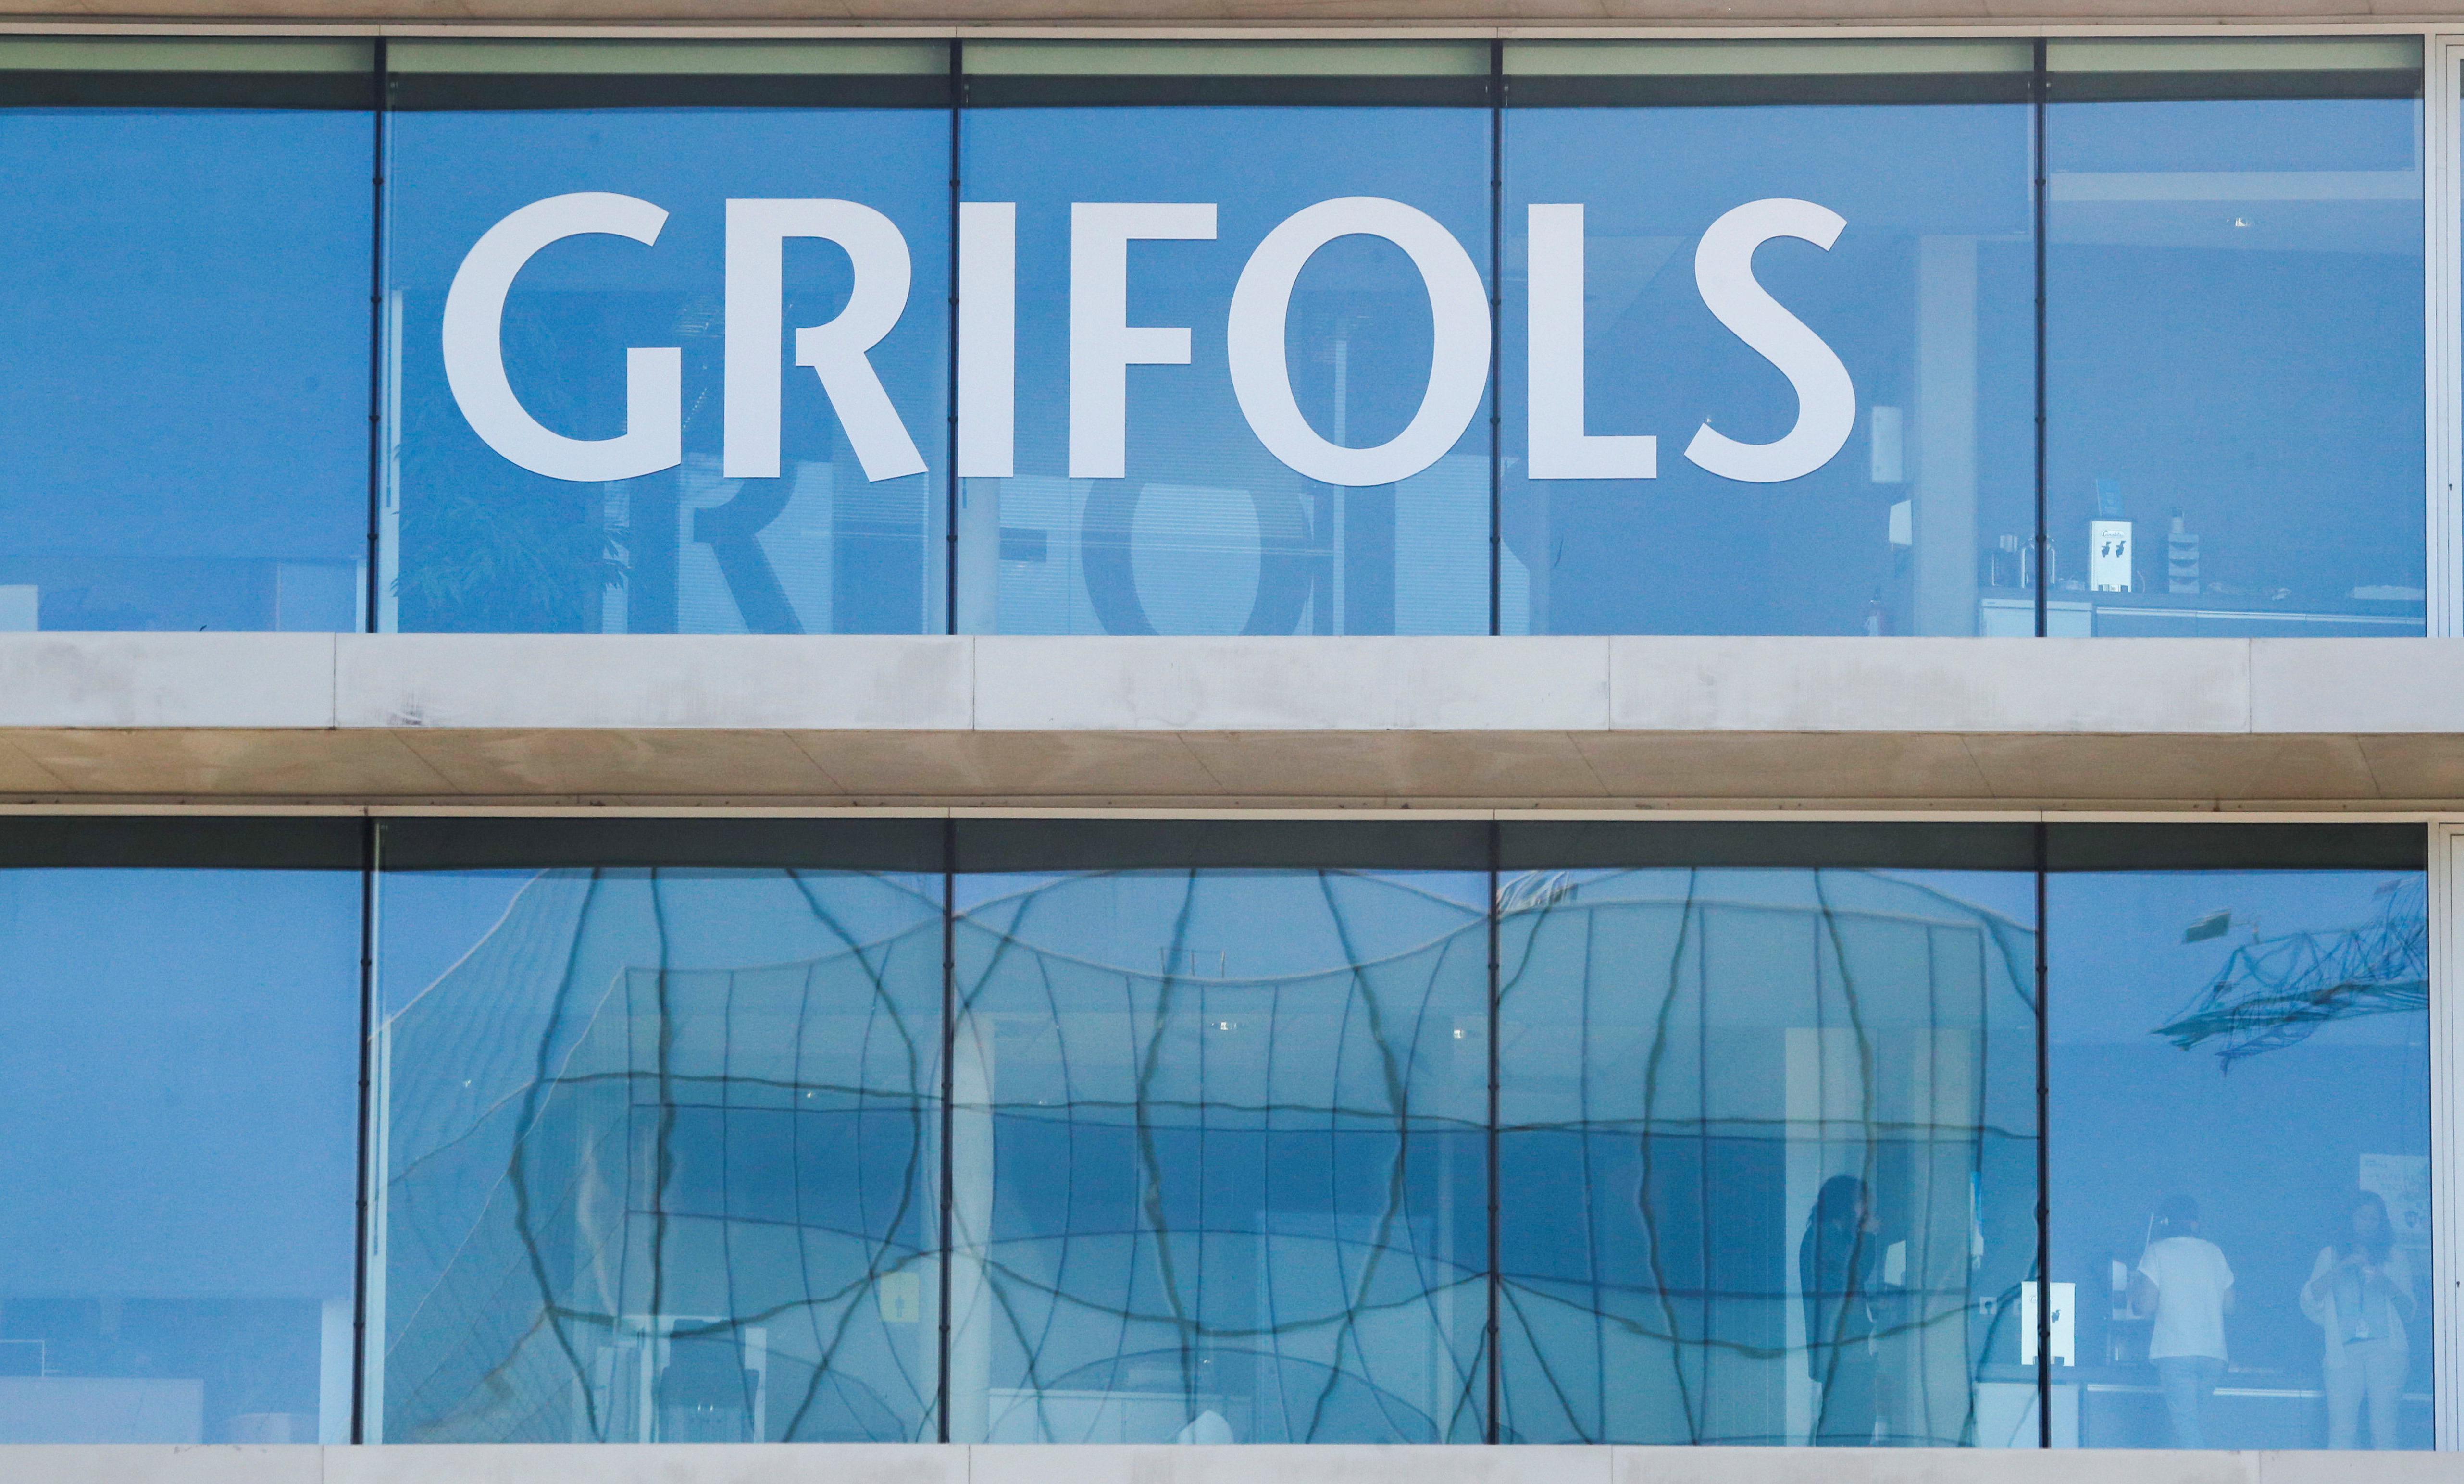 The logo of the Spanish pharmaceuticals company Grifols is pictured on their headquarters' building in Sant Cugat del Valles